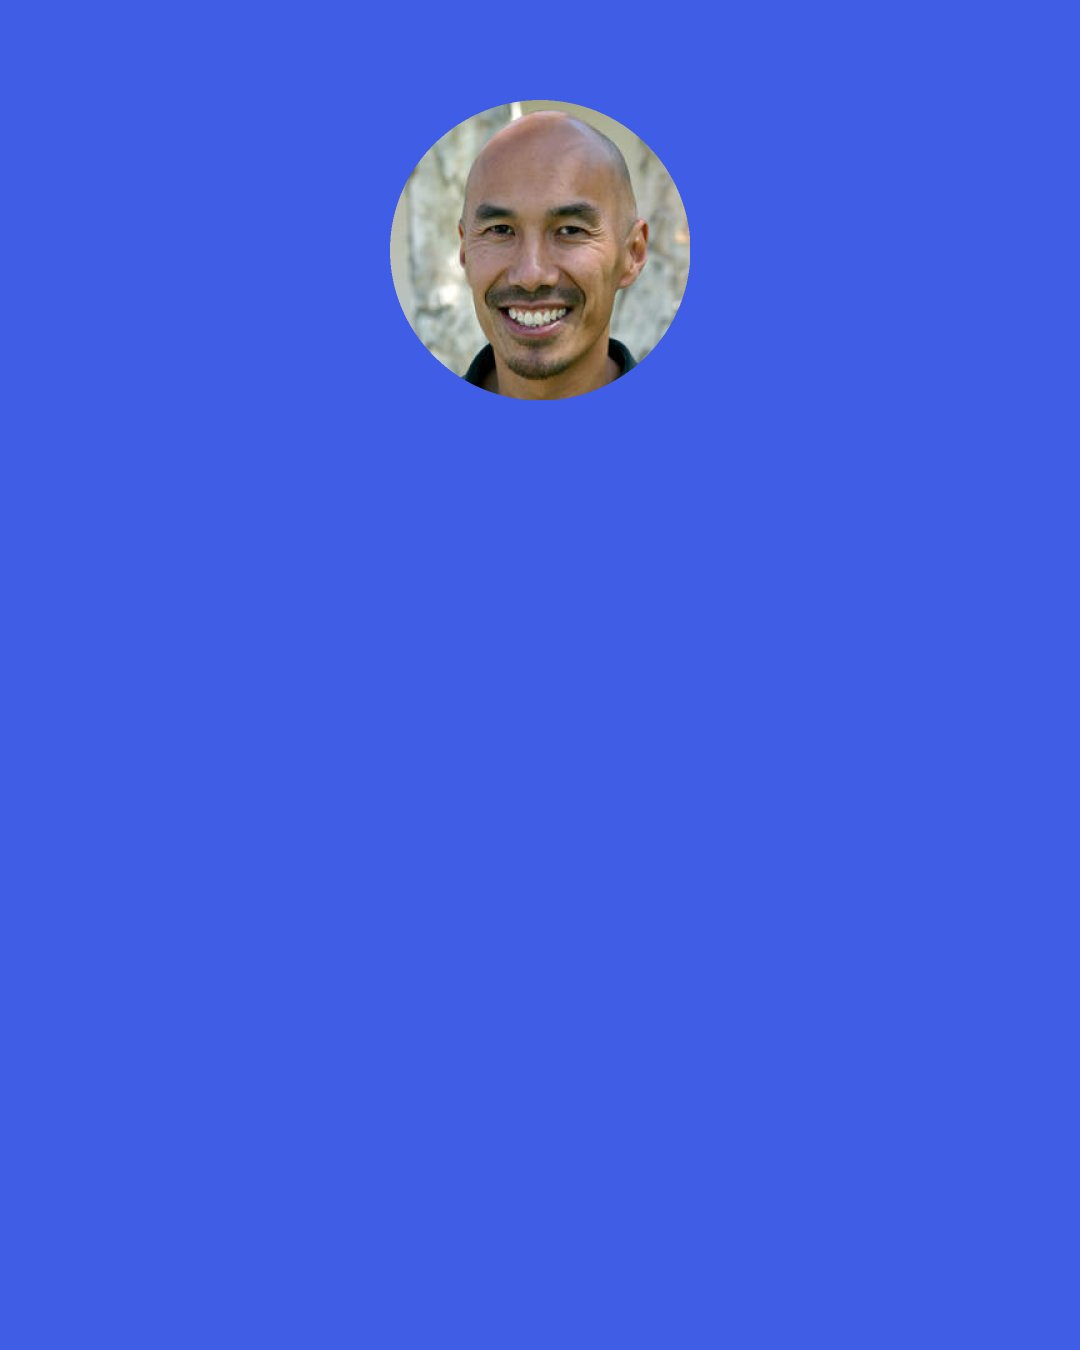 Francis Chan: We are not alone.  Even now there are thousands of beings in heaven watching what is going on down here—a ‘great cloud of witnesses,’ the Scripture says.  It reminds me that there is so much more to our existence than what we can see.  What we do reverberates through the heavens and into eternity.